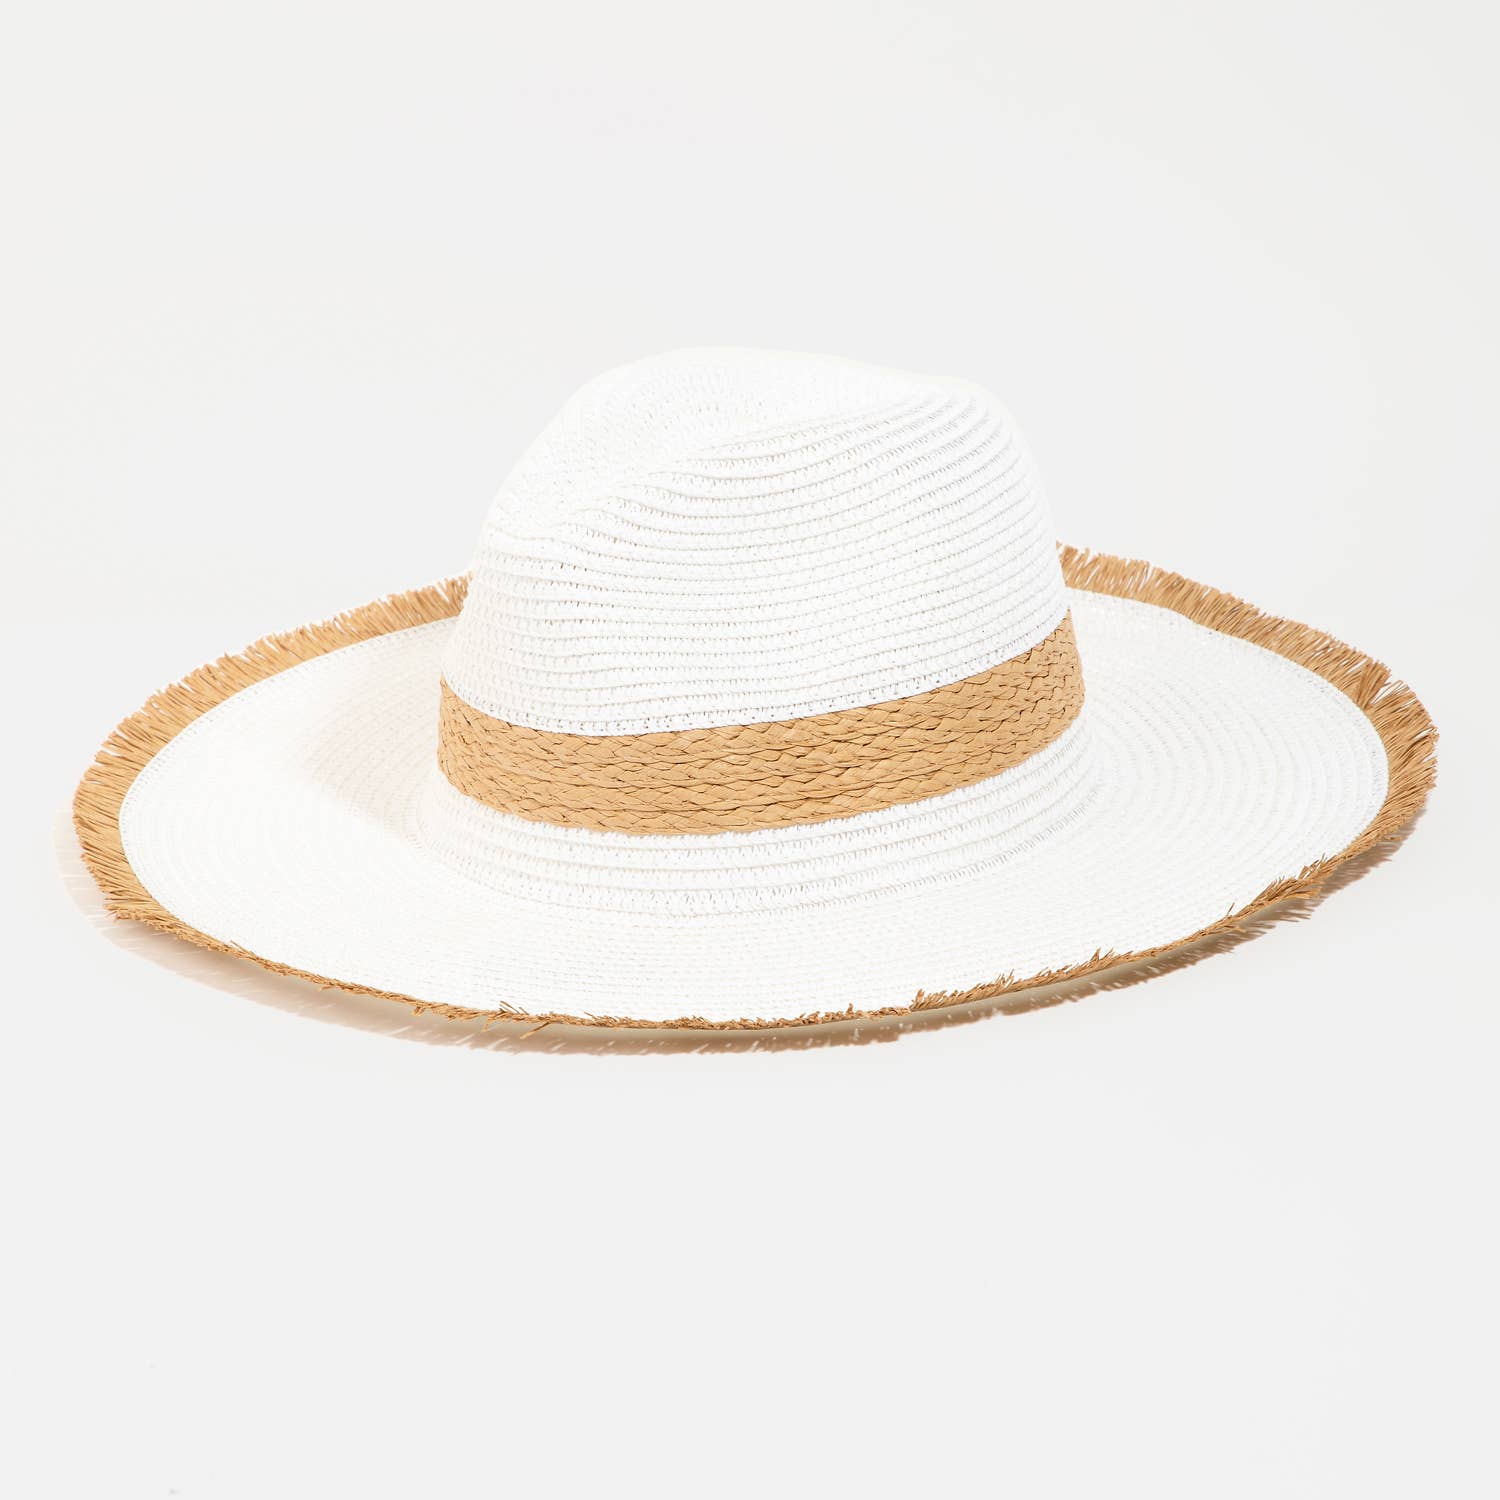 Collections by Fame Accessories - Flat Brim Straw Braided Strap Sun Hat - CLASSY CLOSET BOUTIQUECollections by Fame Accessories - Flat Brim Straw Braided Strap Sun HatBAGS & ACCESSORIESMMT8970WH